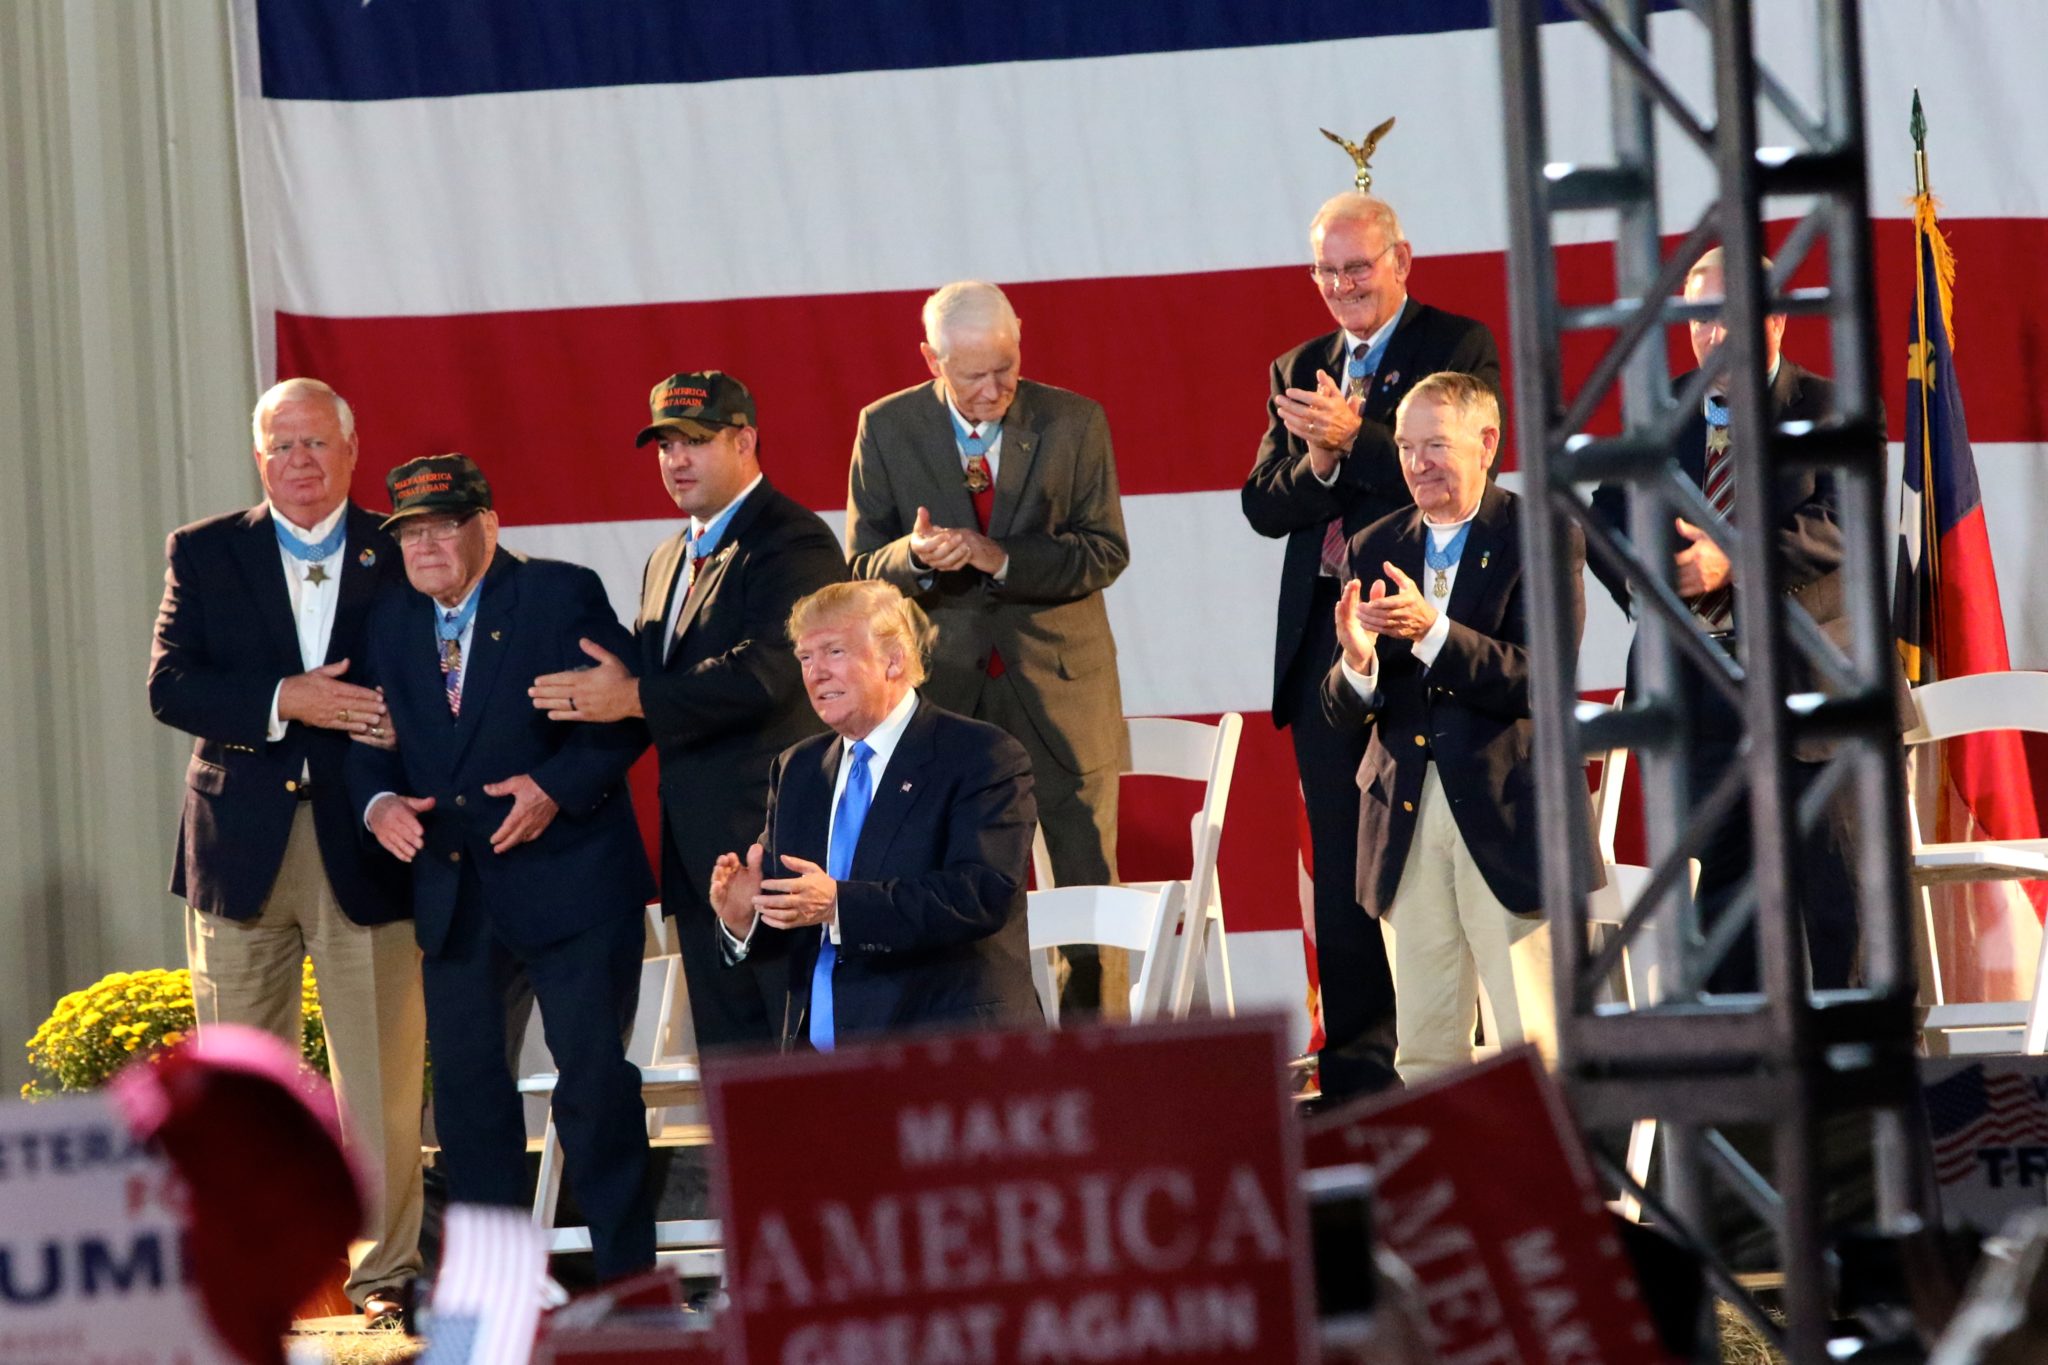 Donald Trump pays tribute to several Congressional Medal of Honor recipients who joined him on stage Thursday night in Selma.